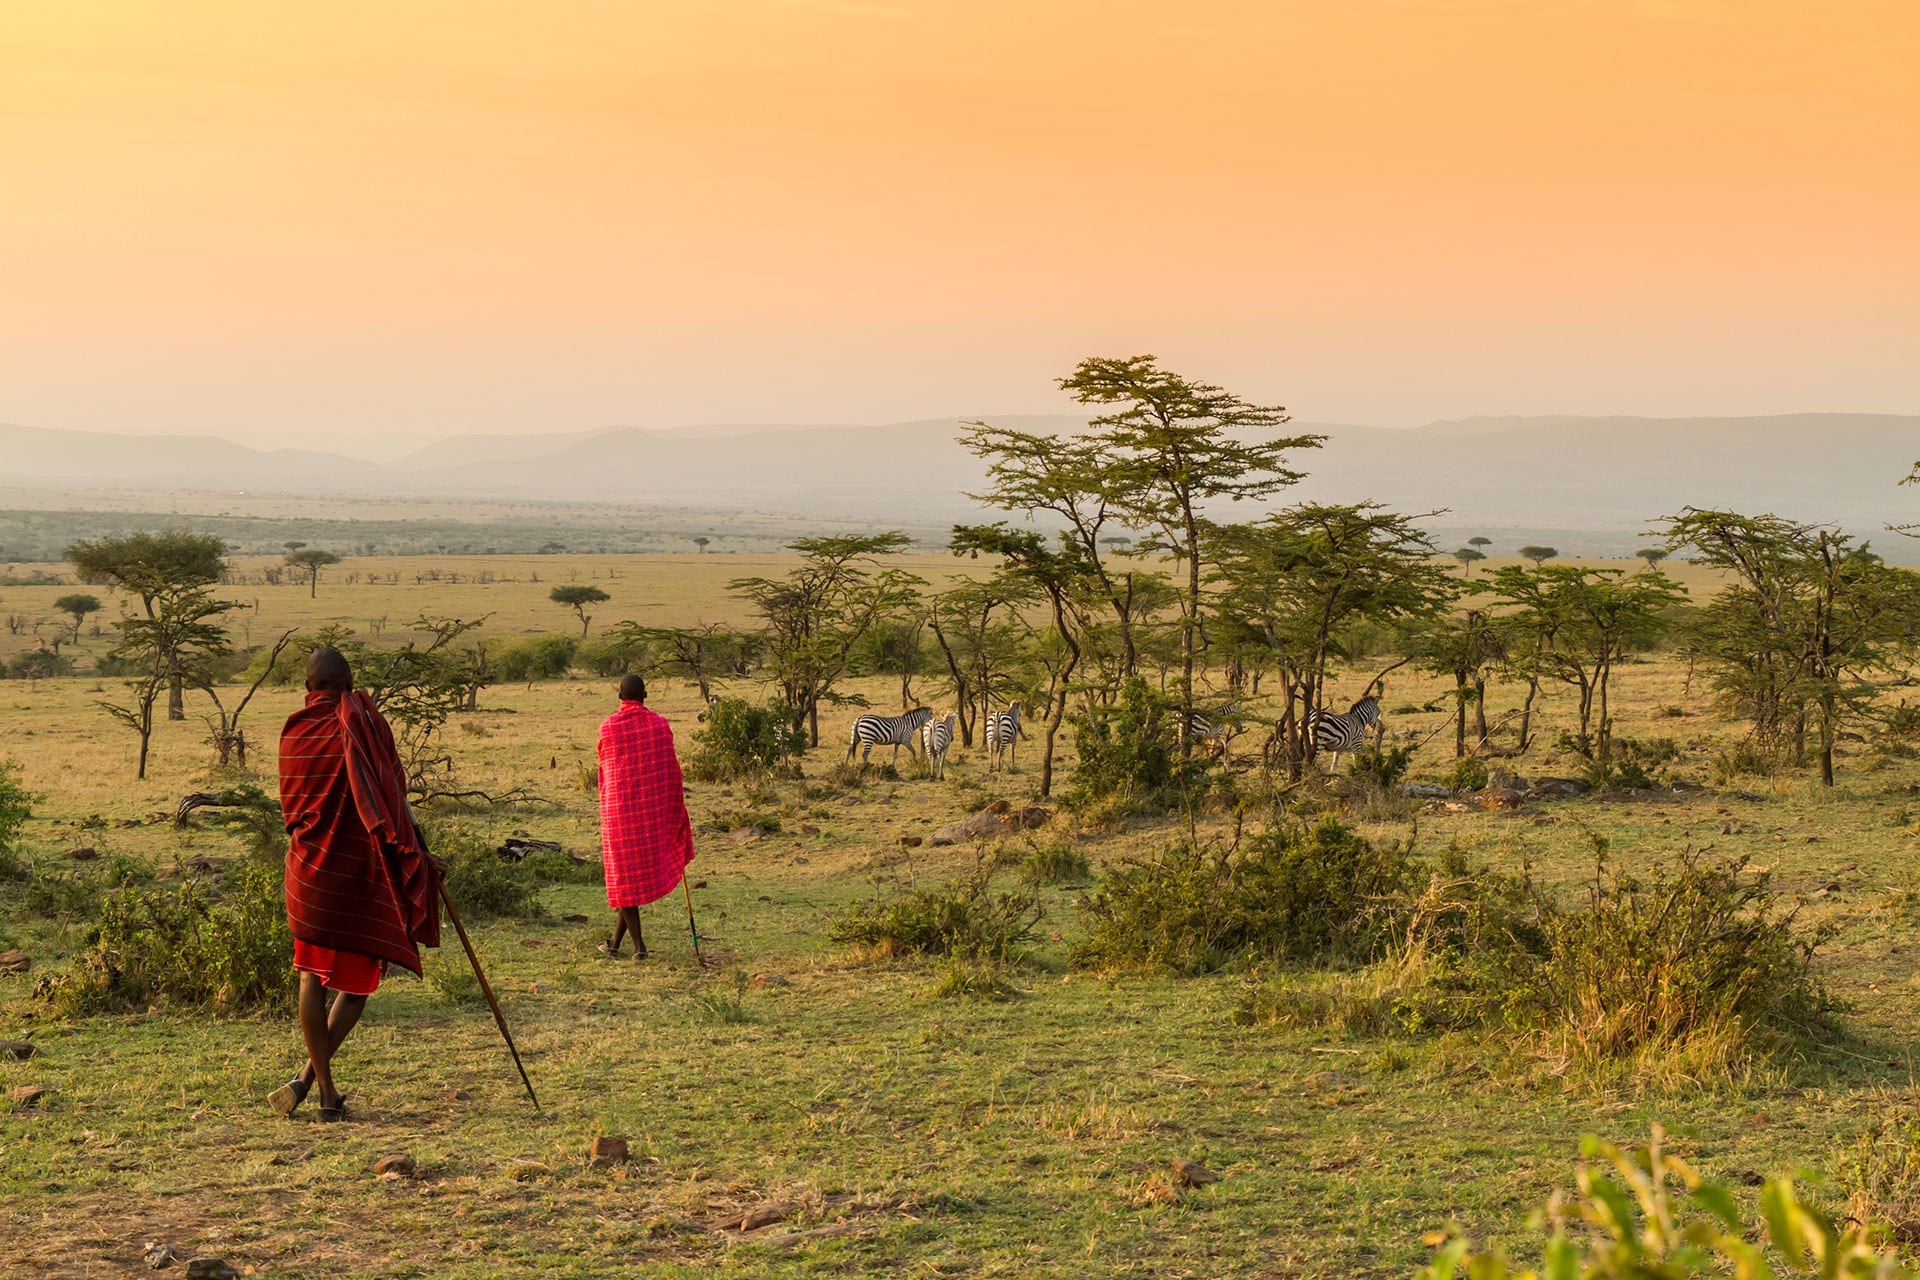 Maasai warriors walking in the Mara which is included in our journal for masai mara vs serengeti